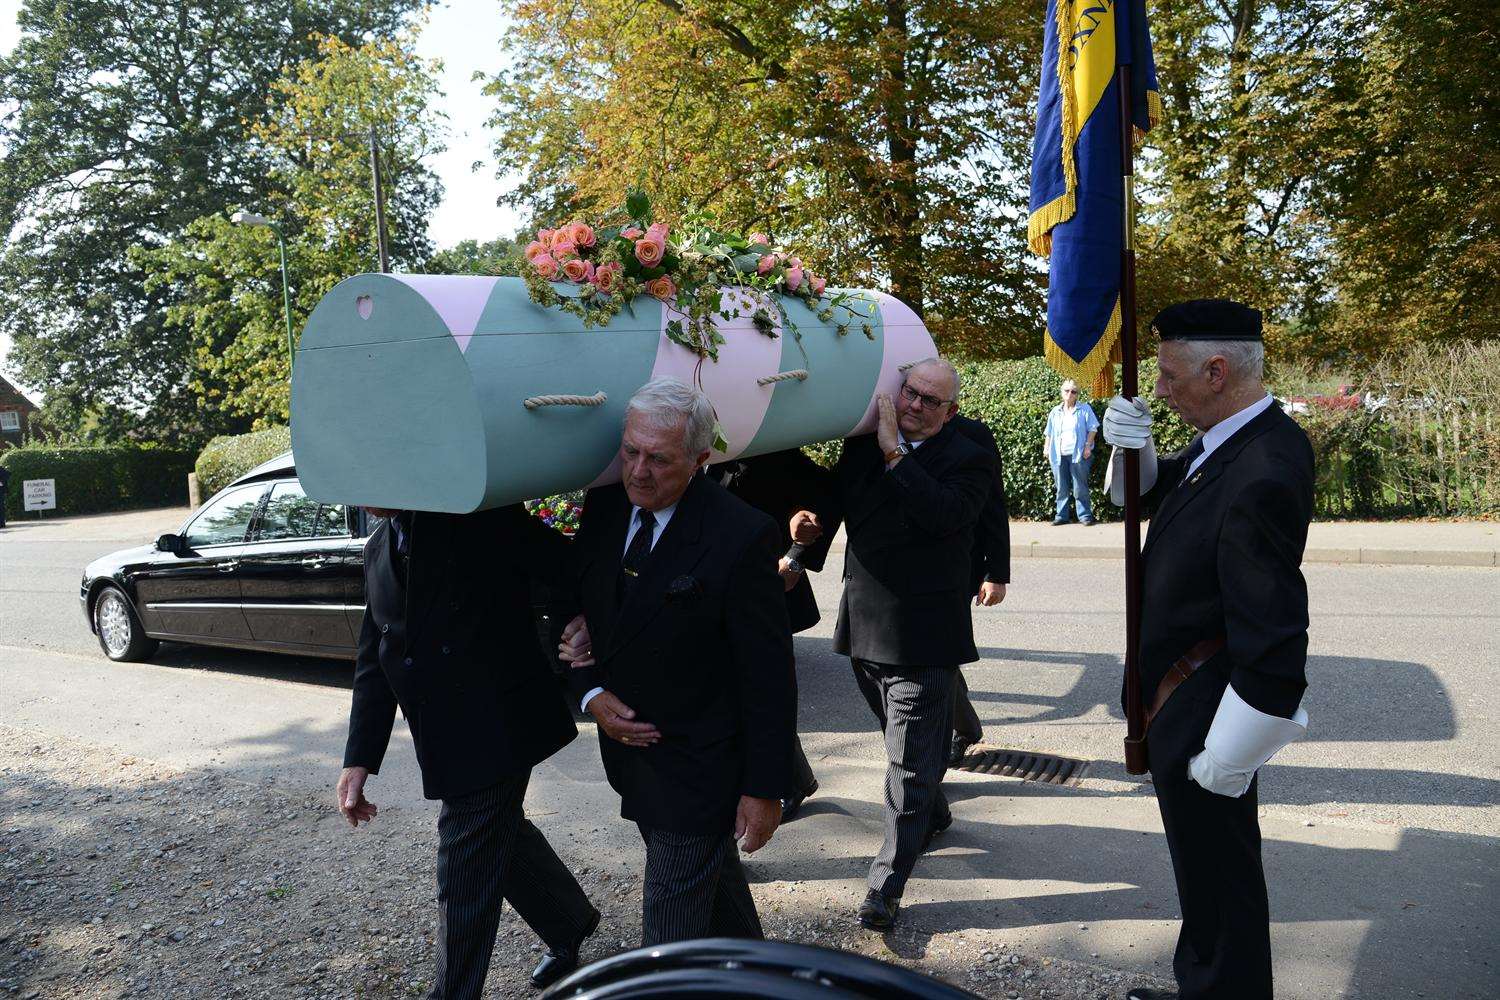 Sir Donald's funeral took place at Wittersham church